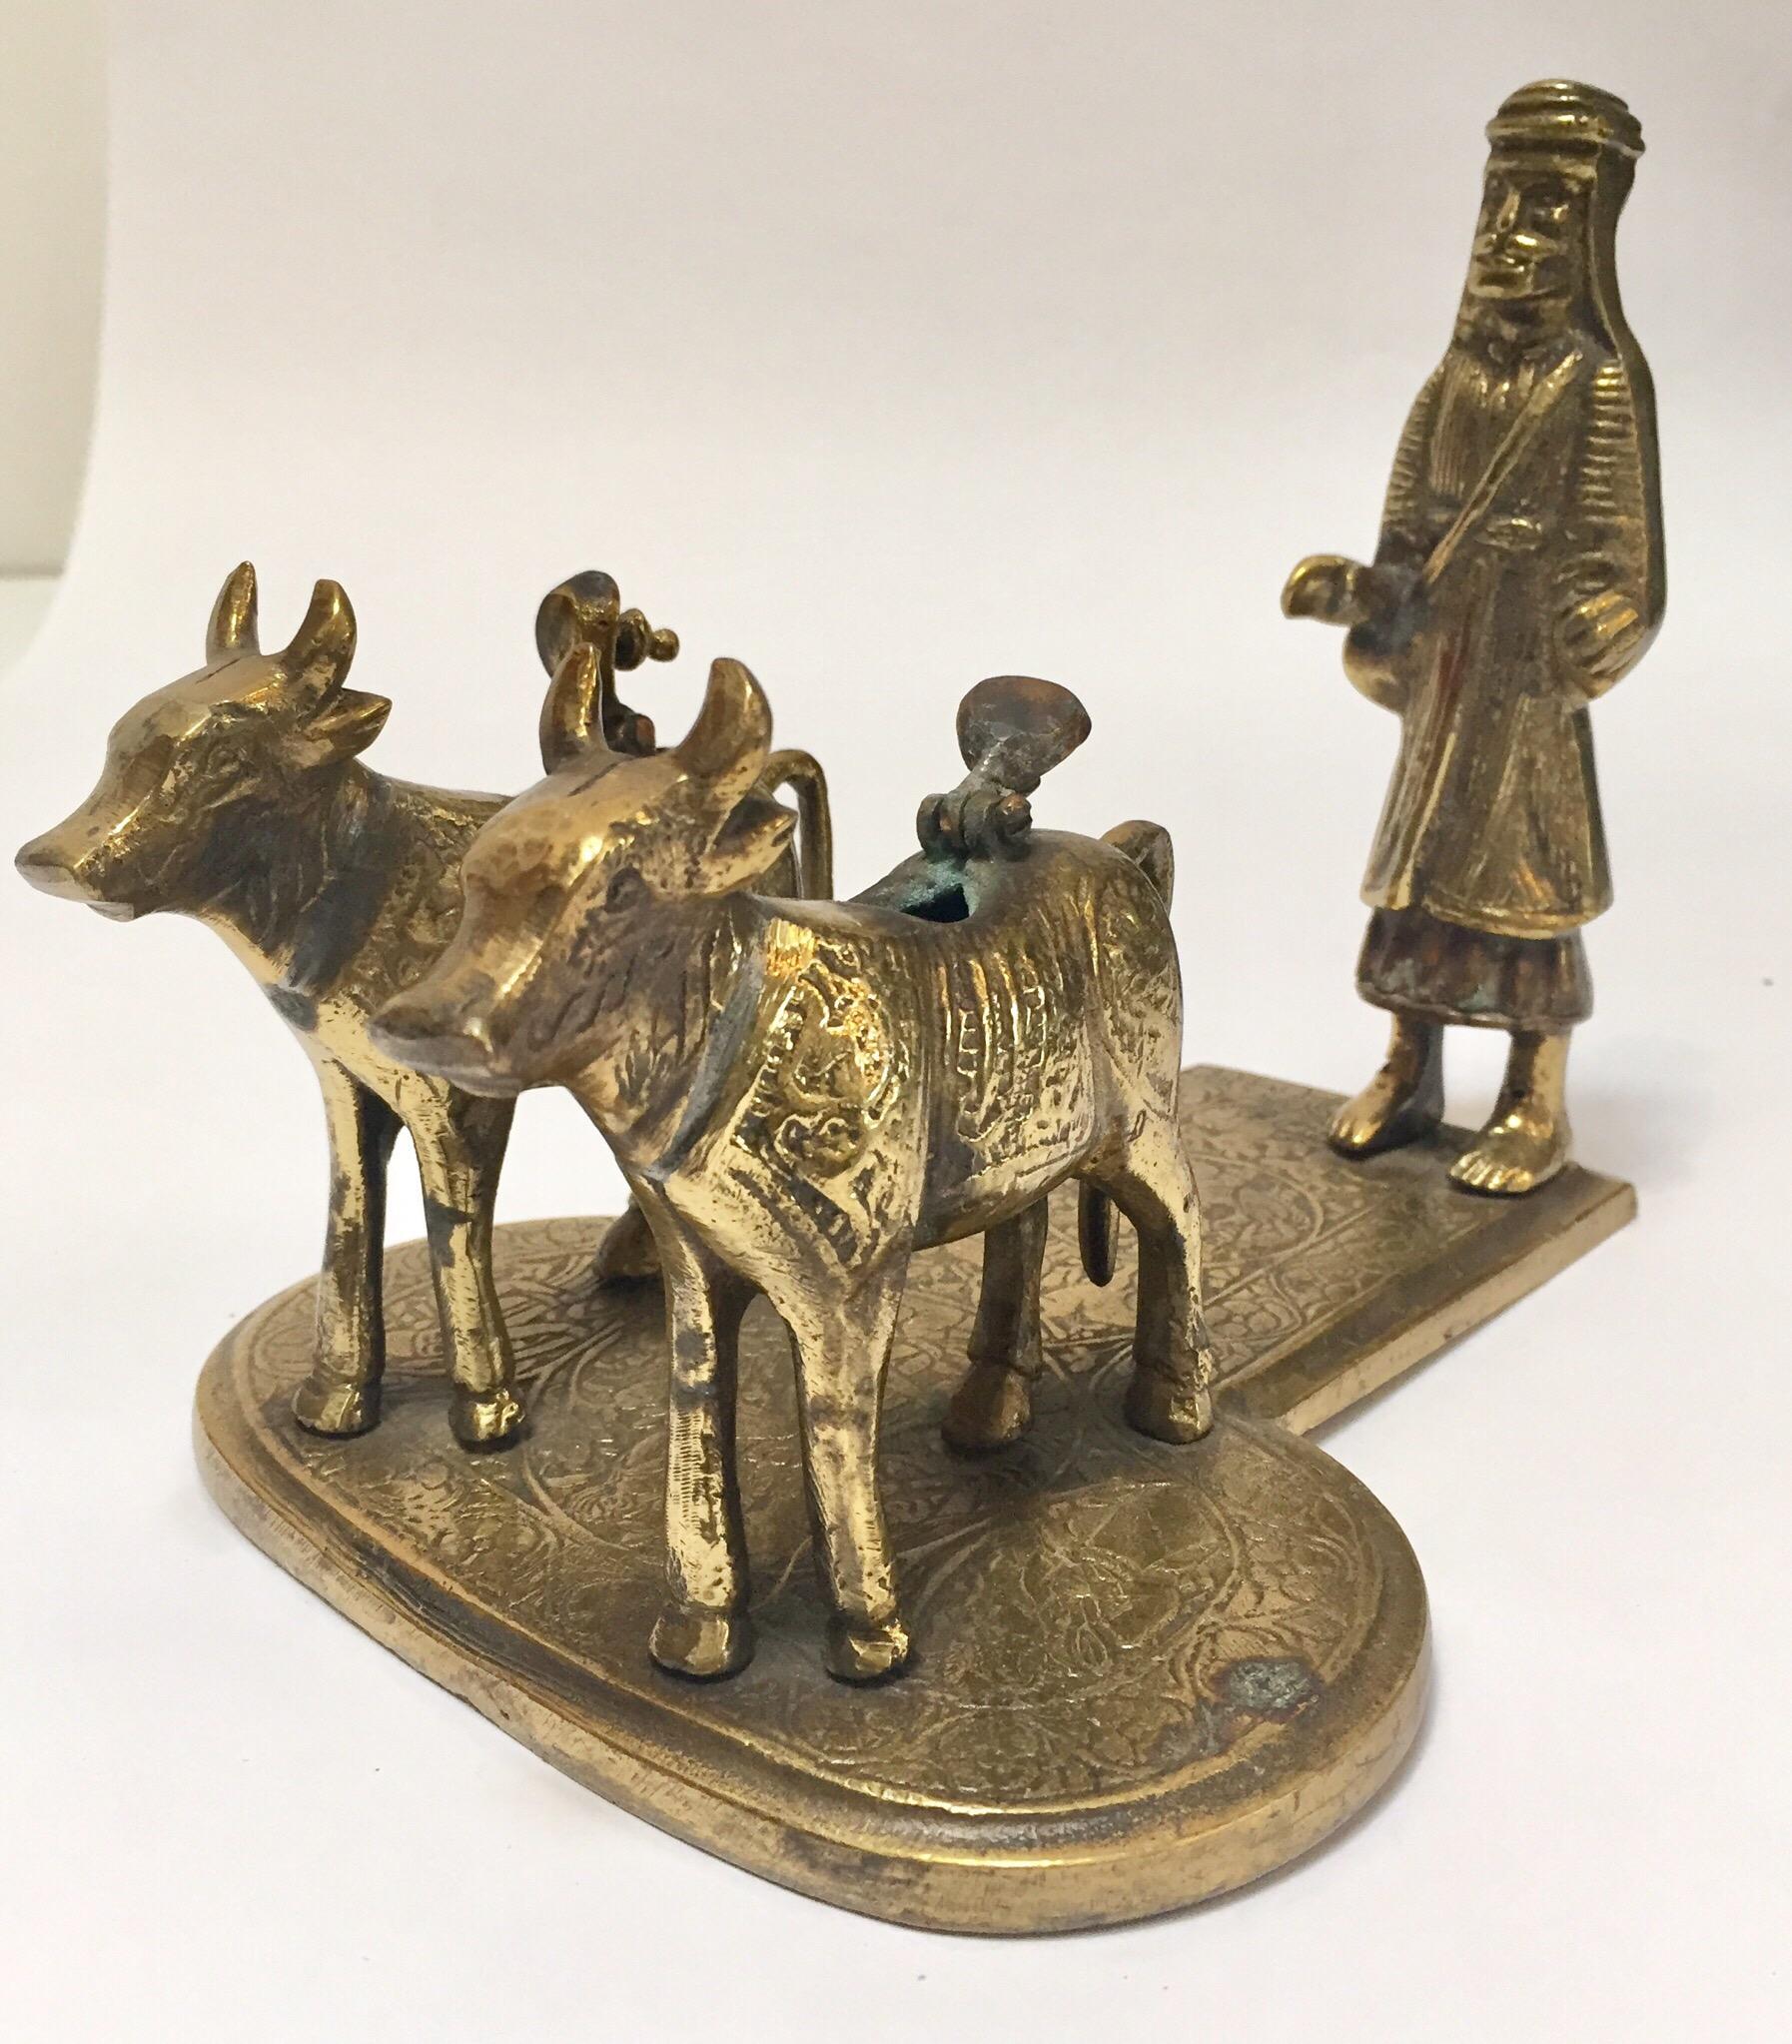 Handcrafted cast brass sculpture of cows and a holy man on stand.
Cows are considered holy in India.
Lord Shiva and Ma Parvati used to sit on Nandi and travel all-over the world and universe according to Hindu Vedas. If you visit a Shiv temple any